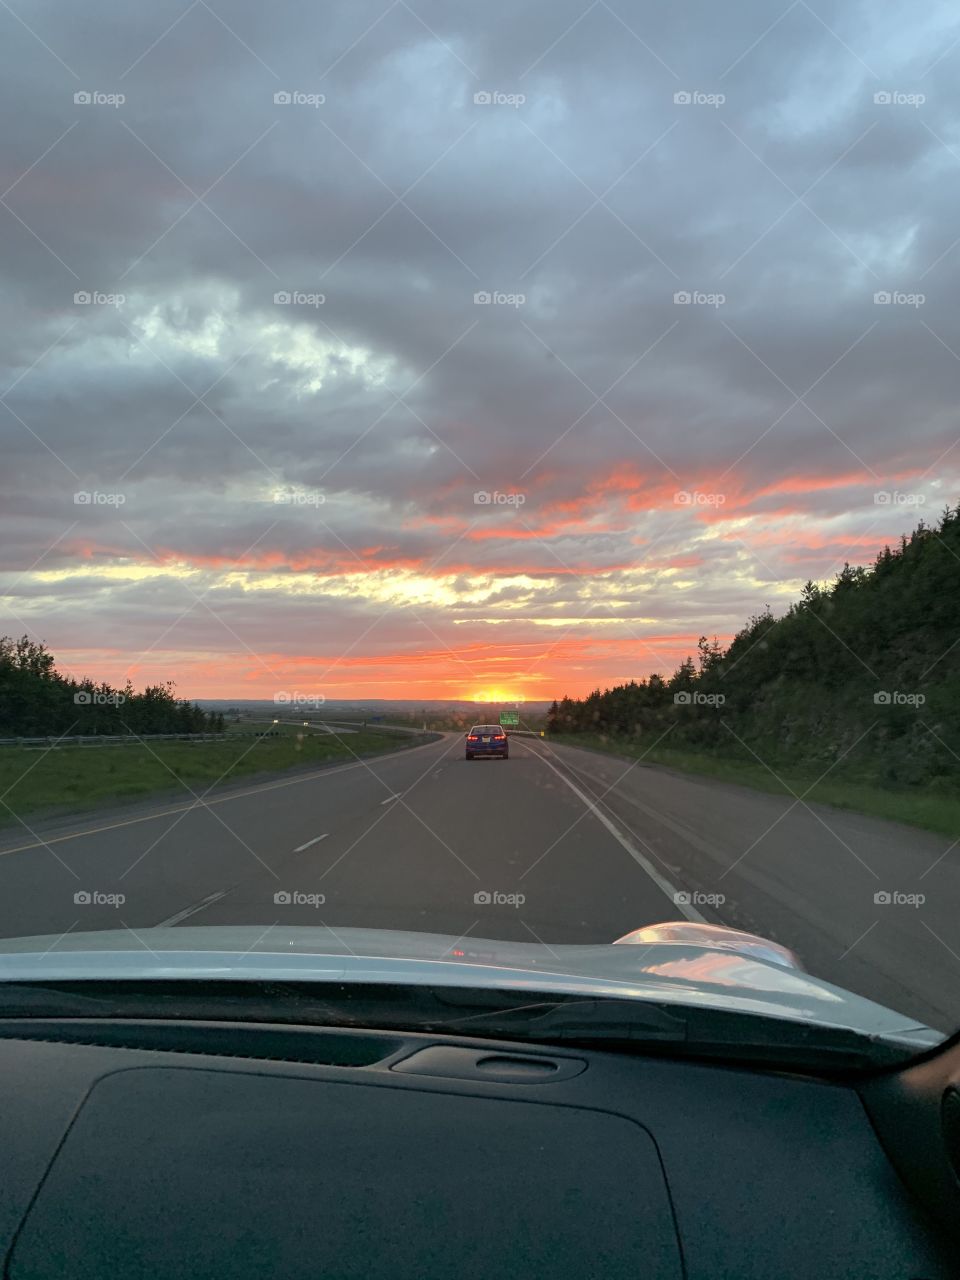 Driving into the sunset on our way home to Moncton, New Brunswick after our day trip to the Fundy National Park. These are the best things about living in this gorgeous province. Canada at its finest. 